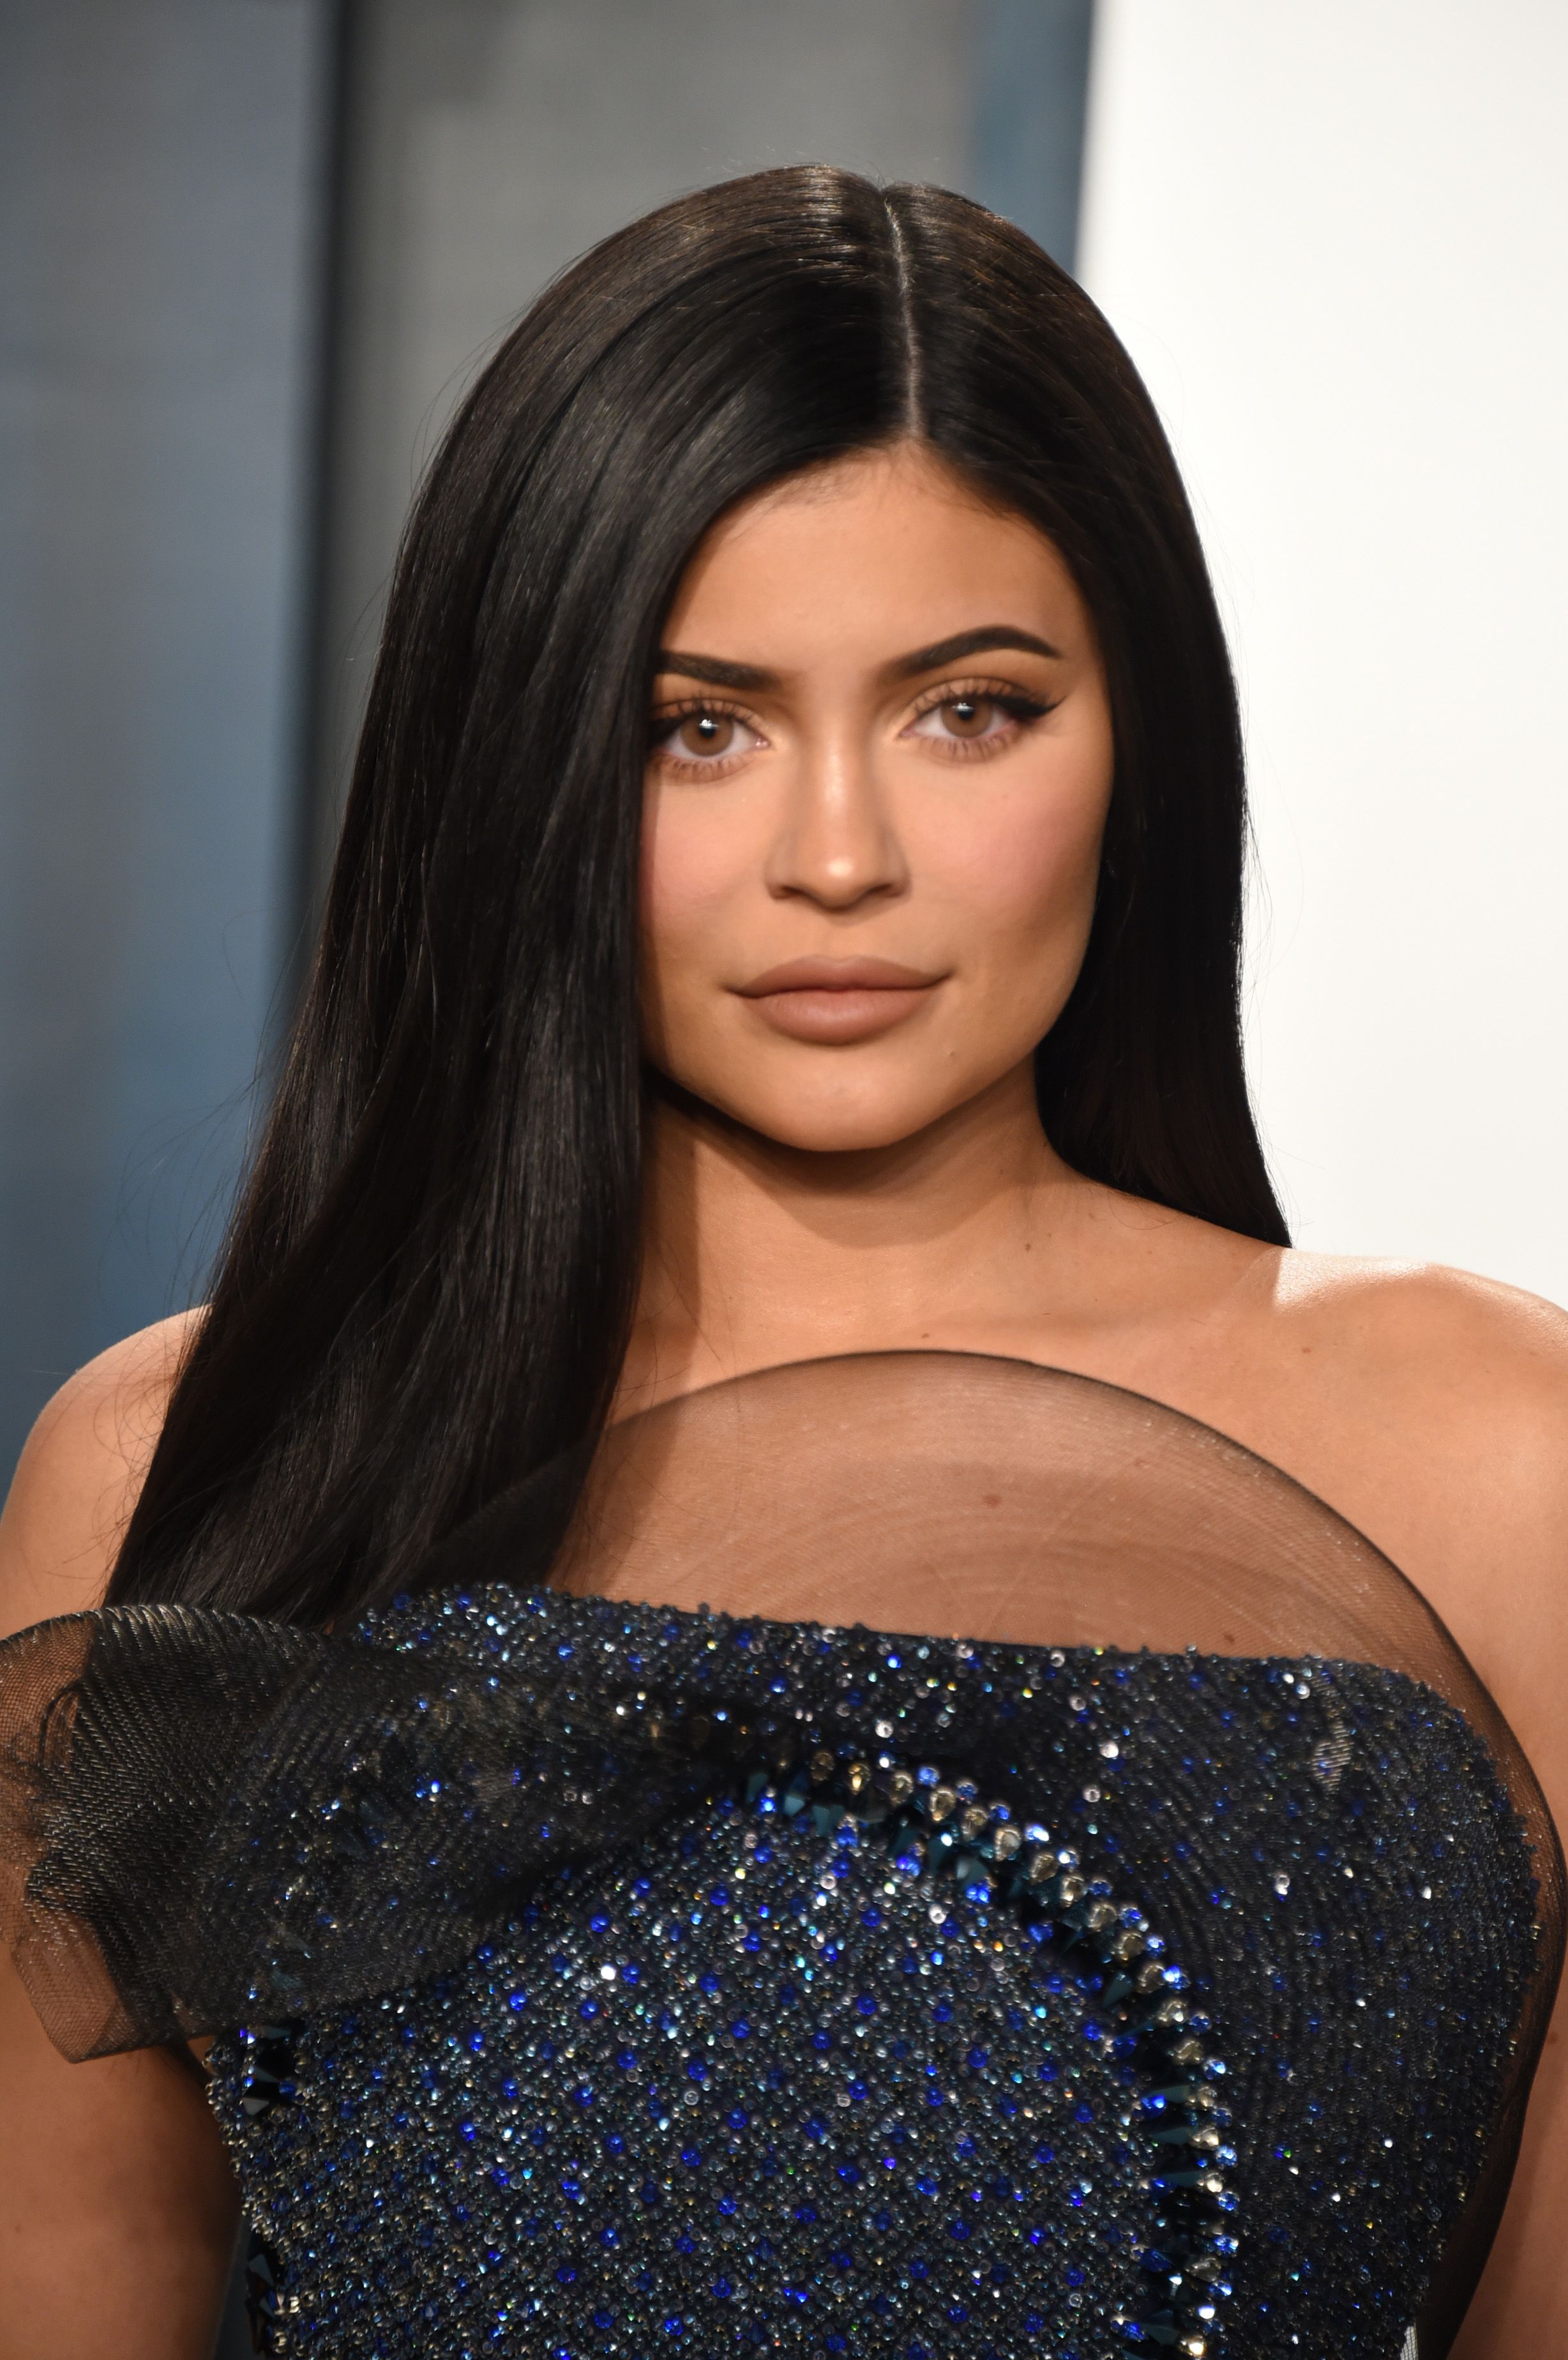 Kylie Jenner - Kylie Jenner Matches Outfits To People Cars And Other ...